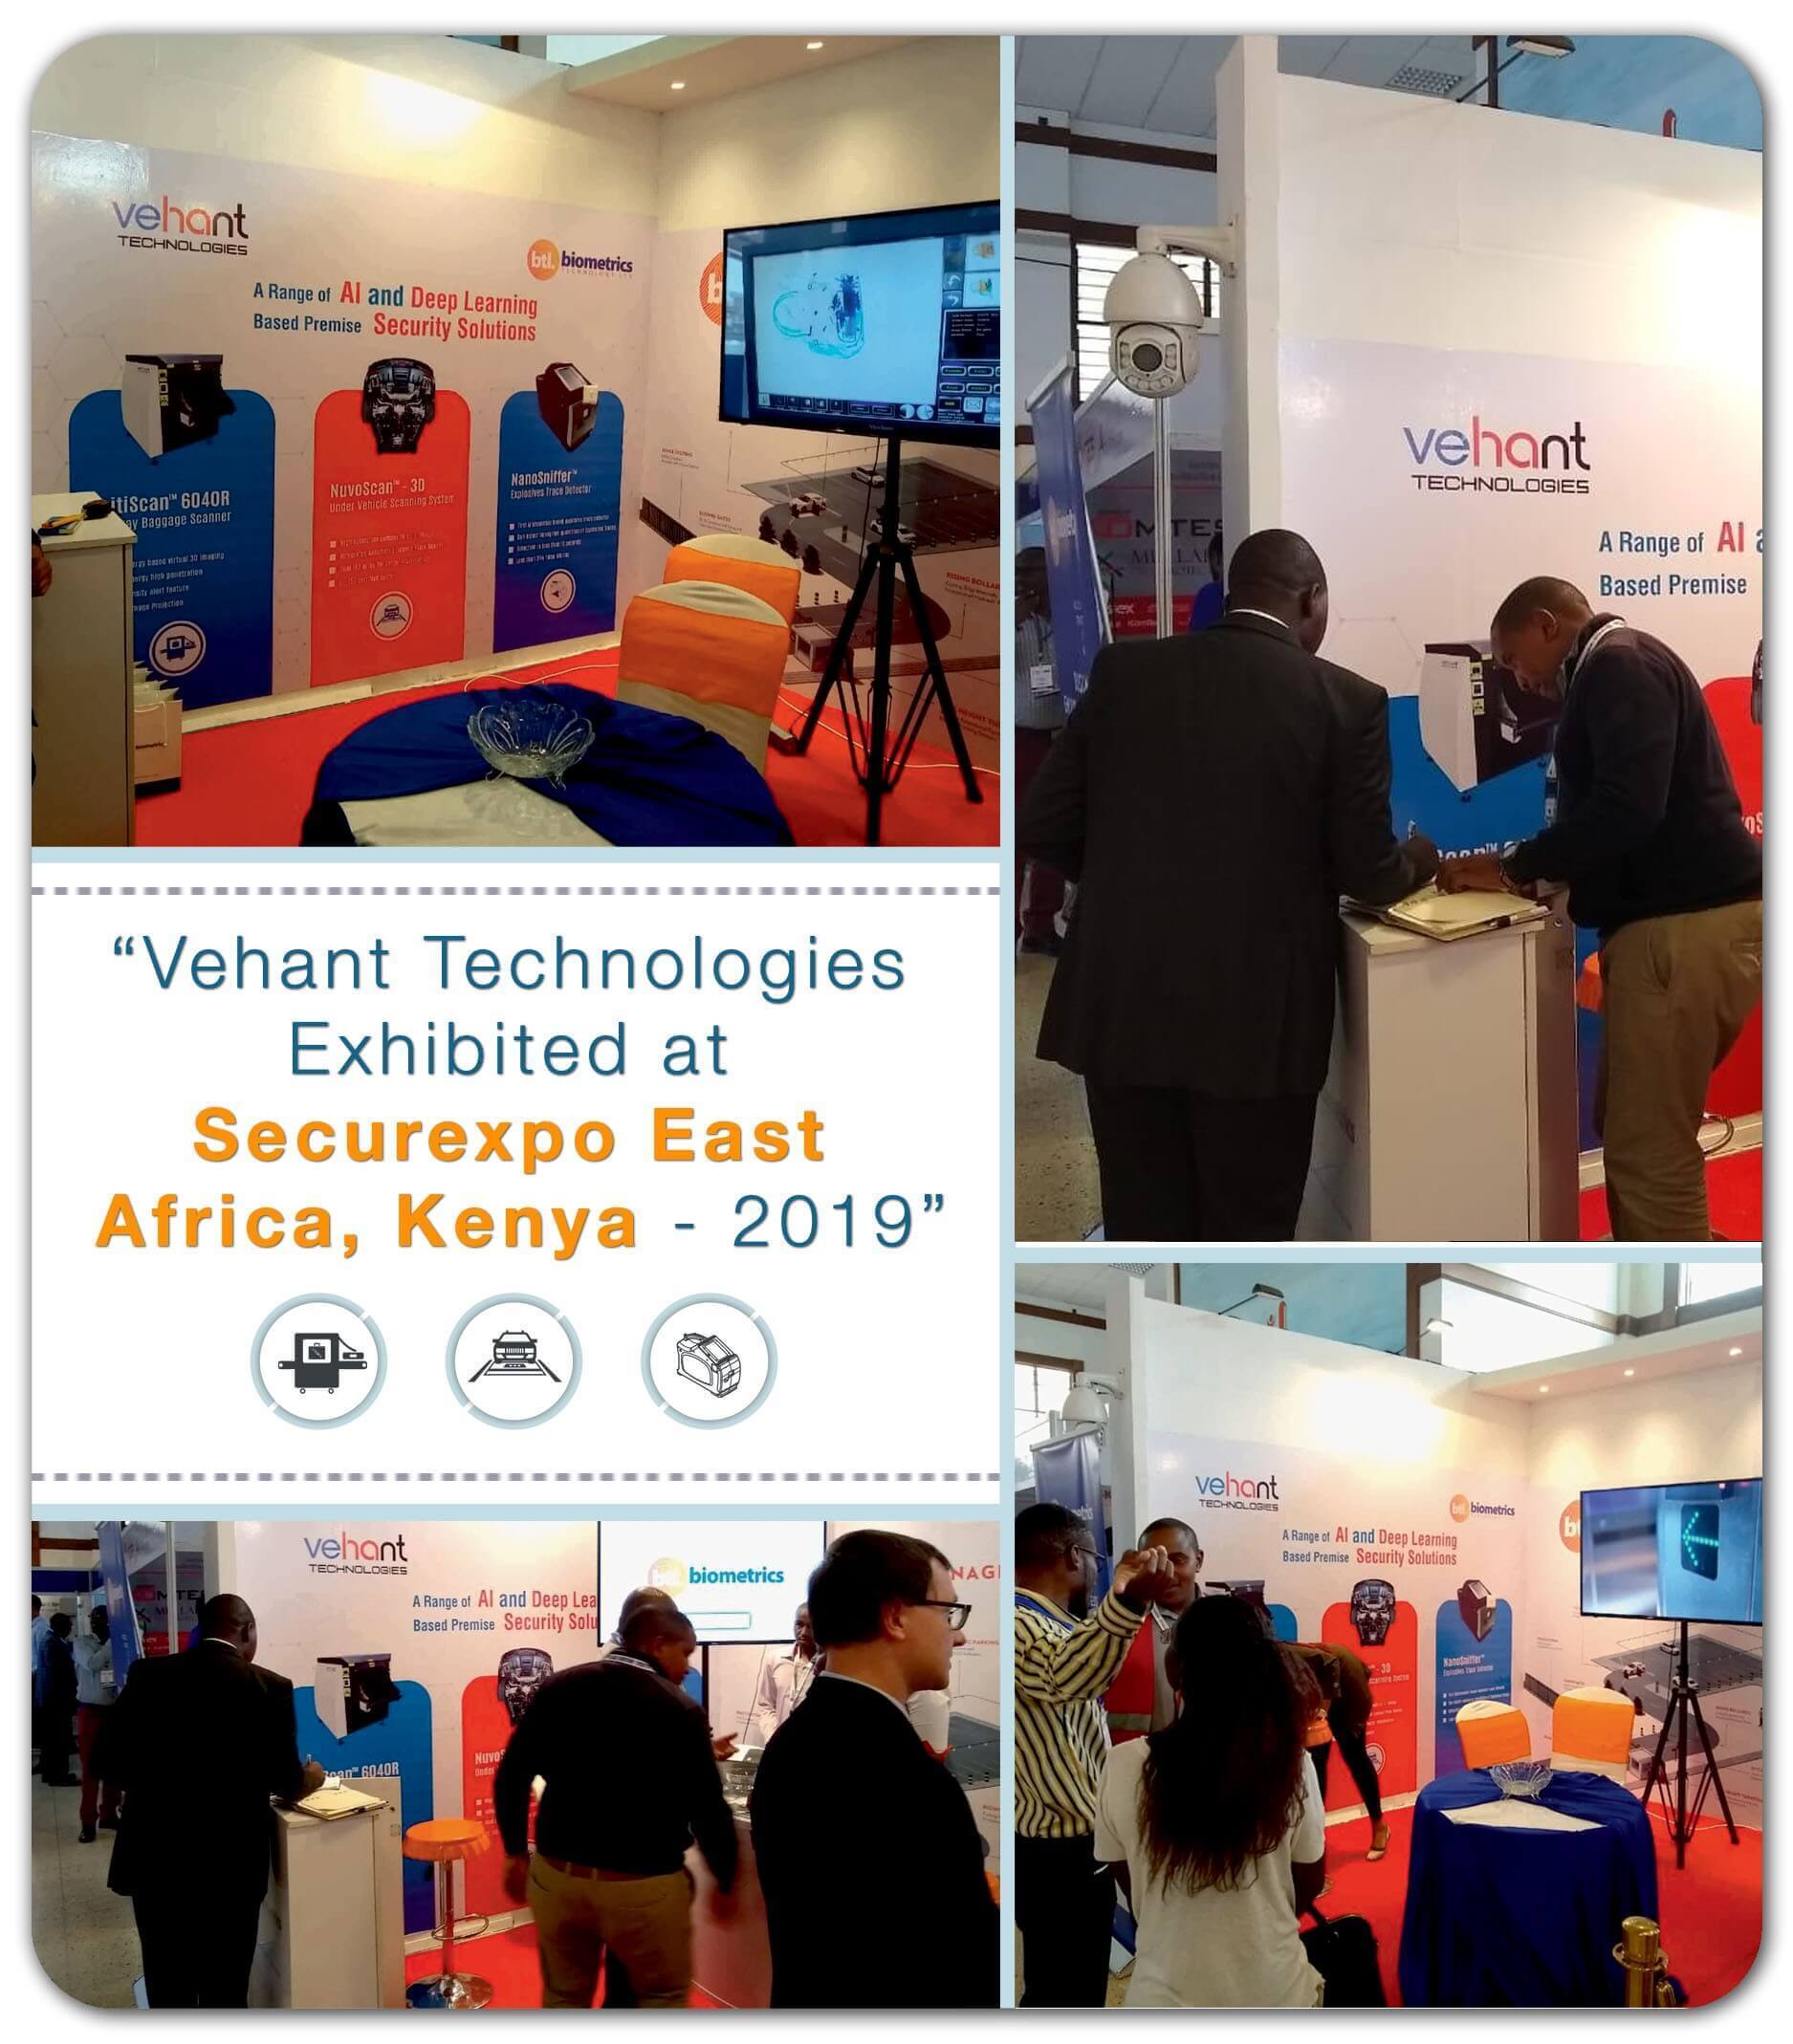 Vehant participated in Securexpo, East Africa, Kenya - 2019